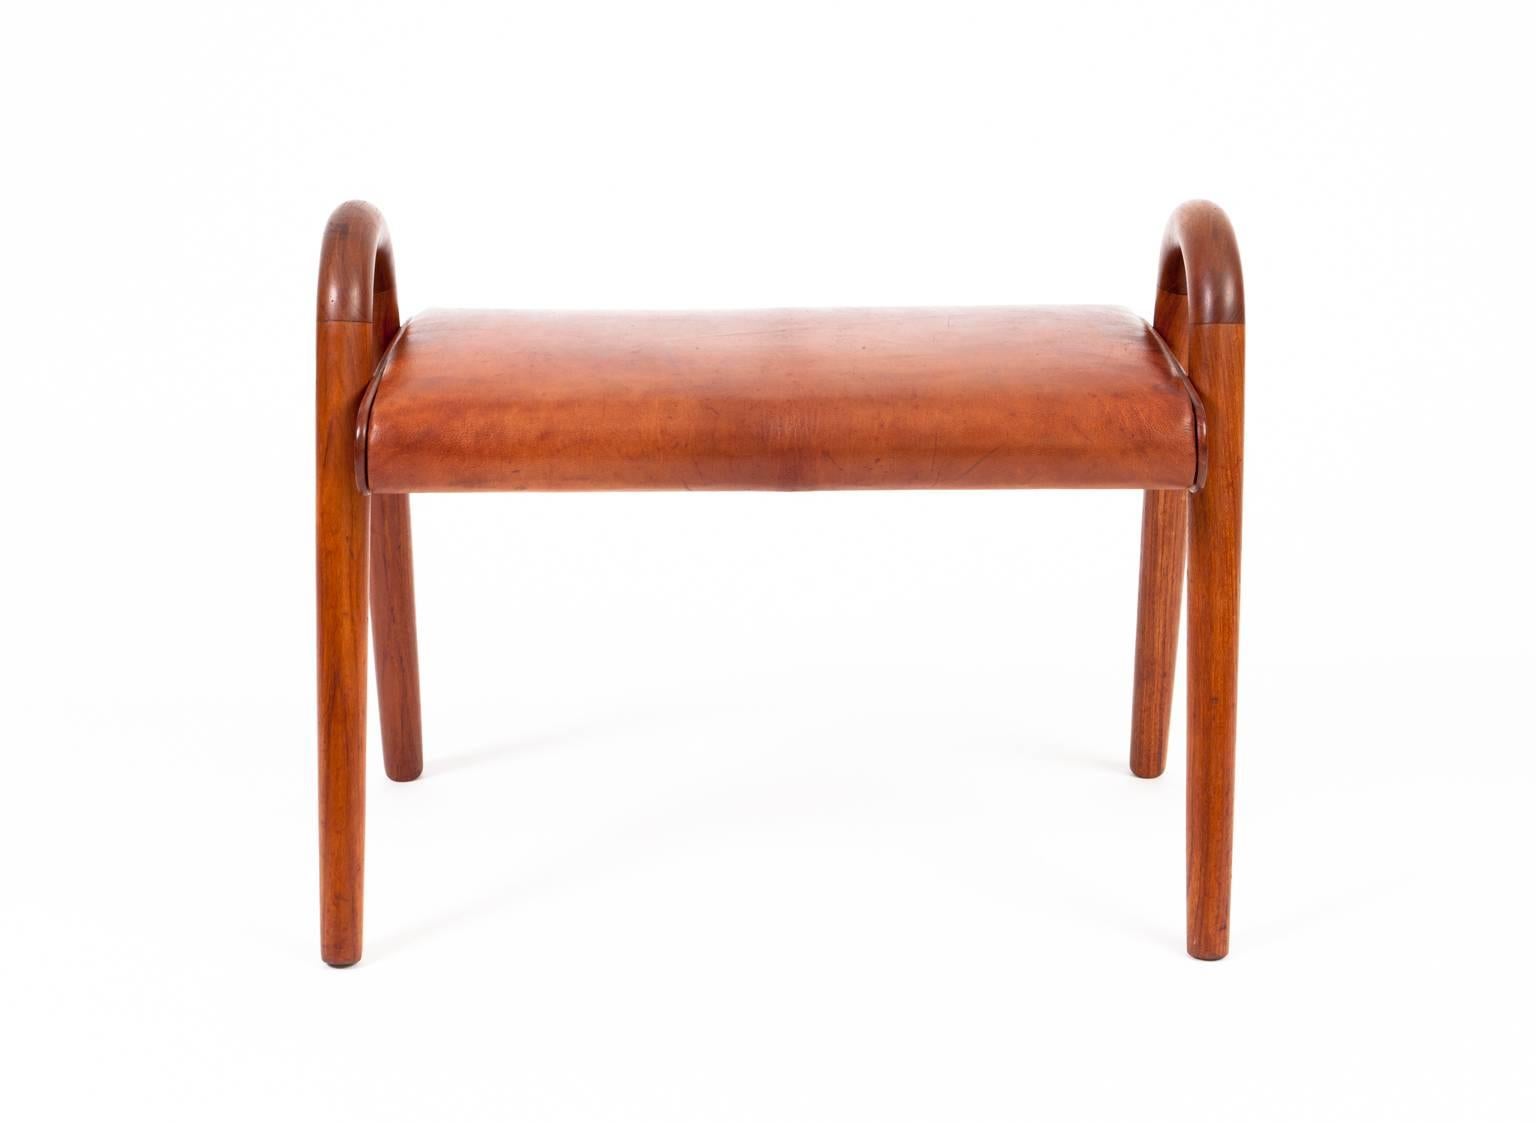 20th Century Vilhelm Lauritzen Pair of Teak Stools with Leather Seat For Sale